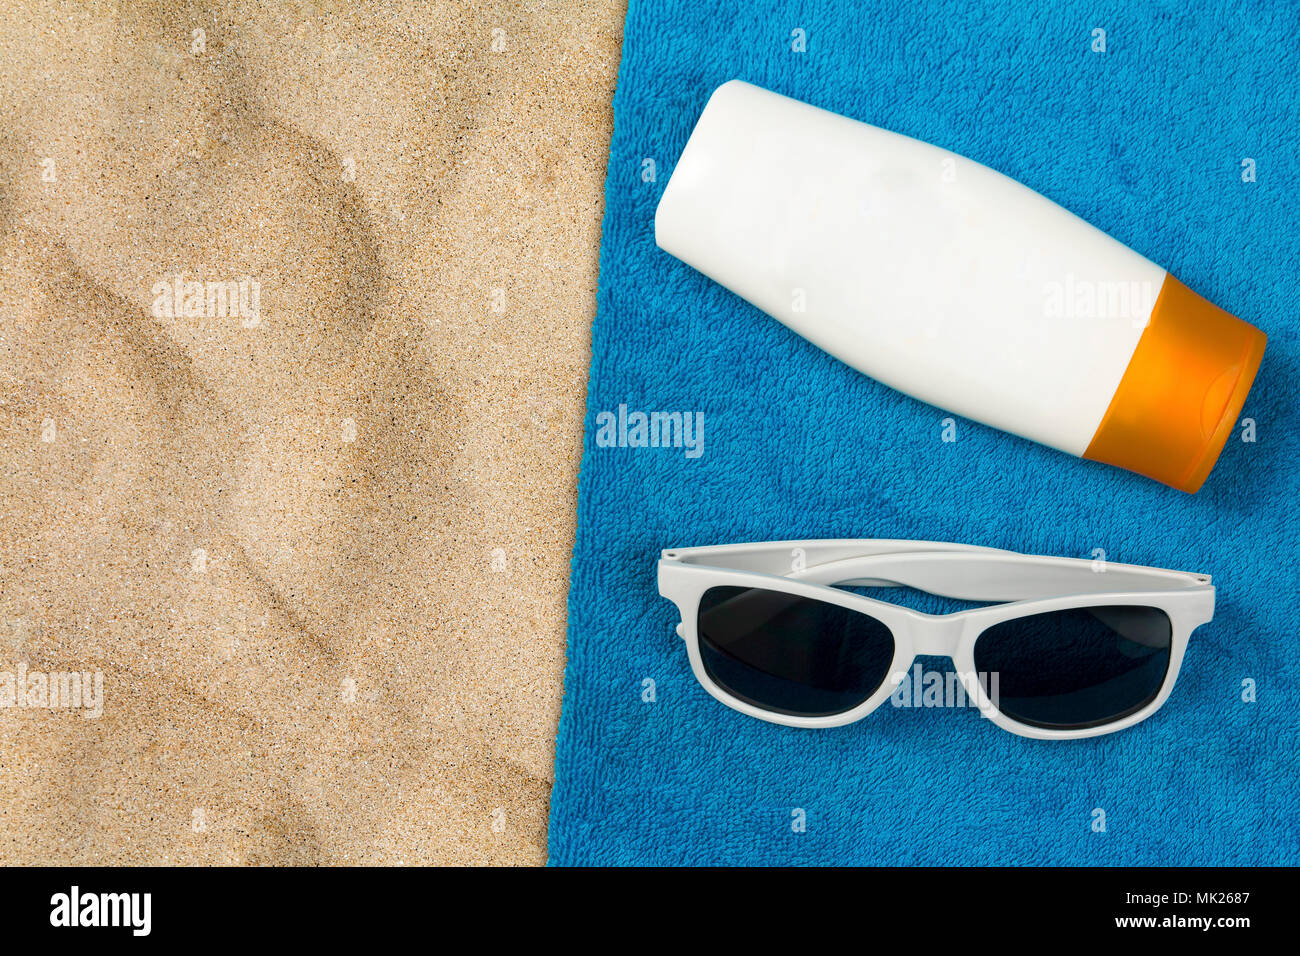 Towel on a sandy beach with a pair of sunglasses and a bottle of suntan cream from overhead with copy space for additional messages Stock Photo